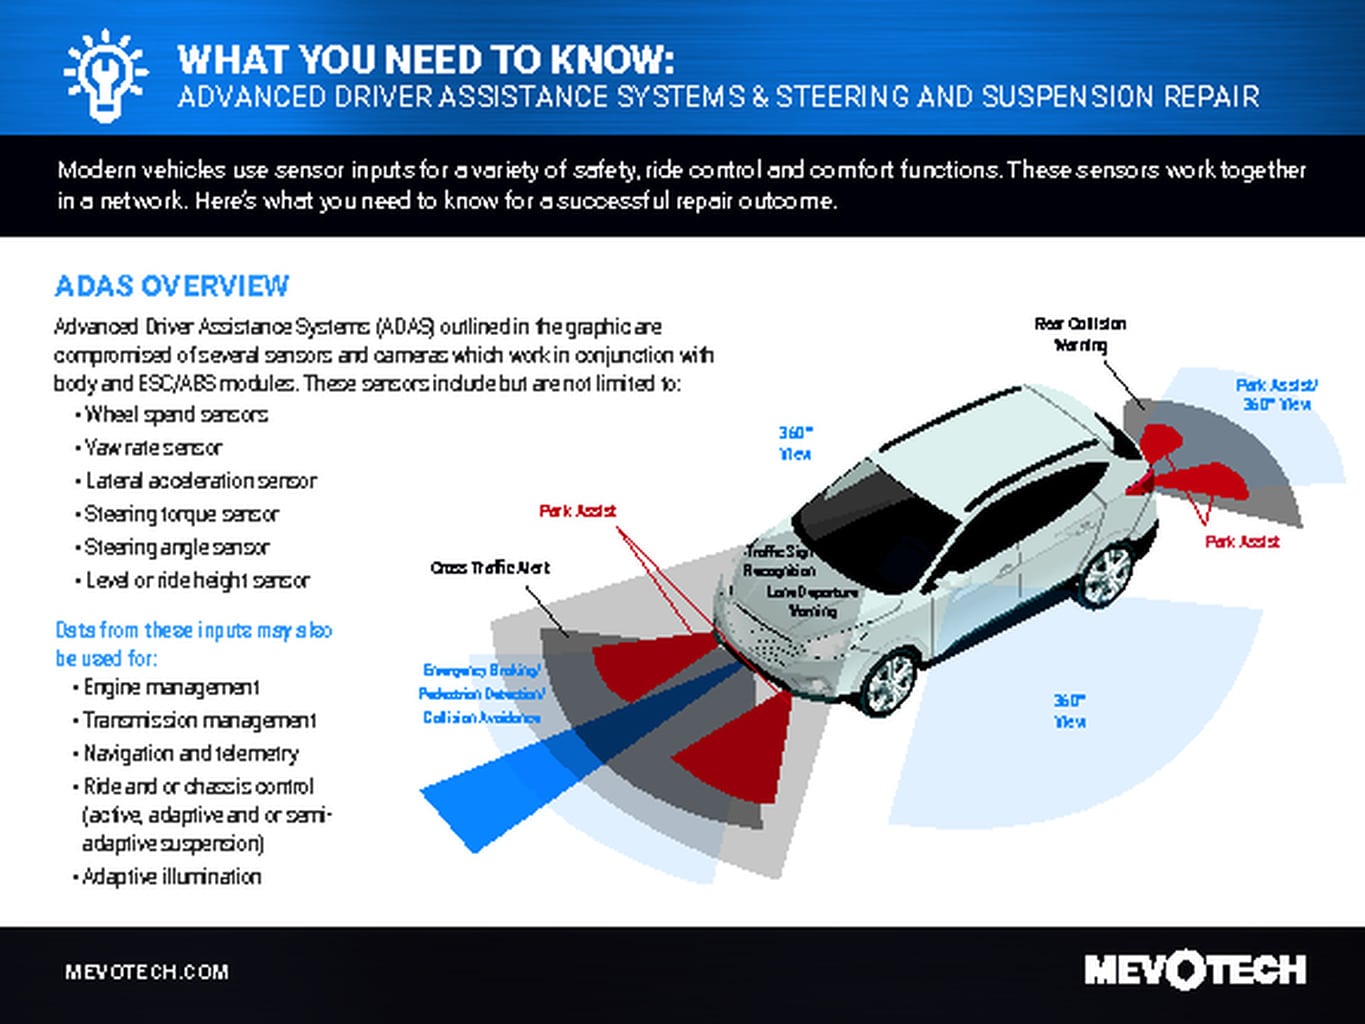 WHAT YOU NEED TO KNOW: ADVANCED DRIVER ASSISTANCE SYSTEMS & STEERING AND SUSPENSION REPAIR